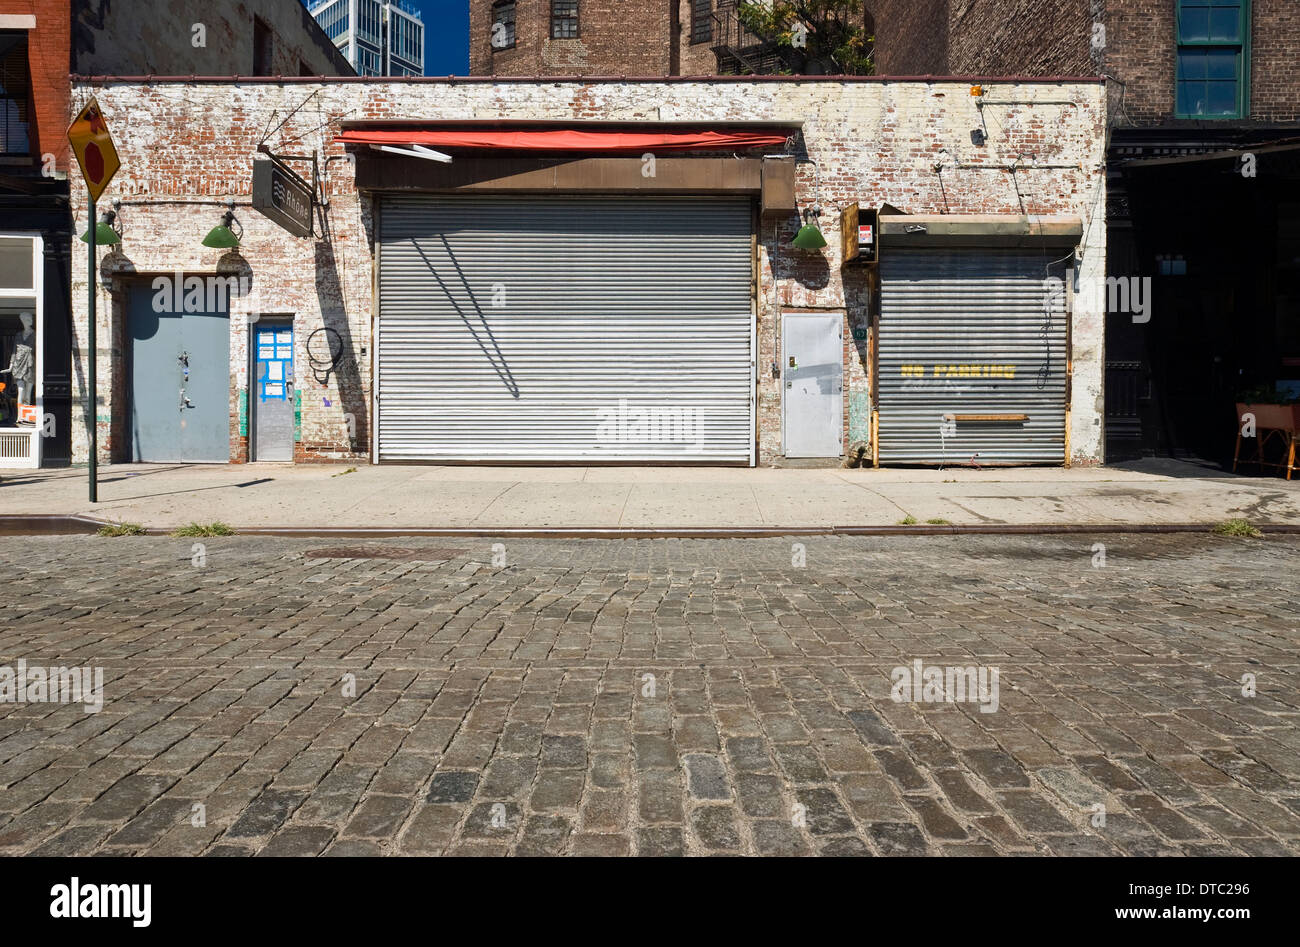 Empty urban street scene in the Meatpacking District, New York City. Stock Photo